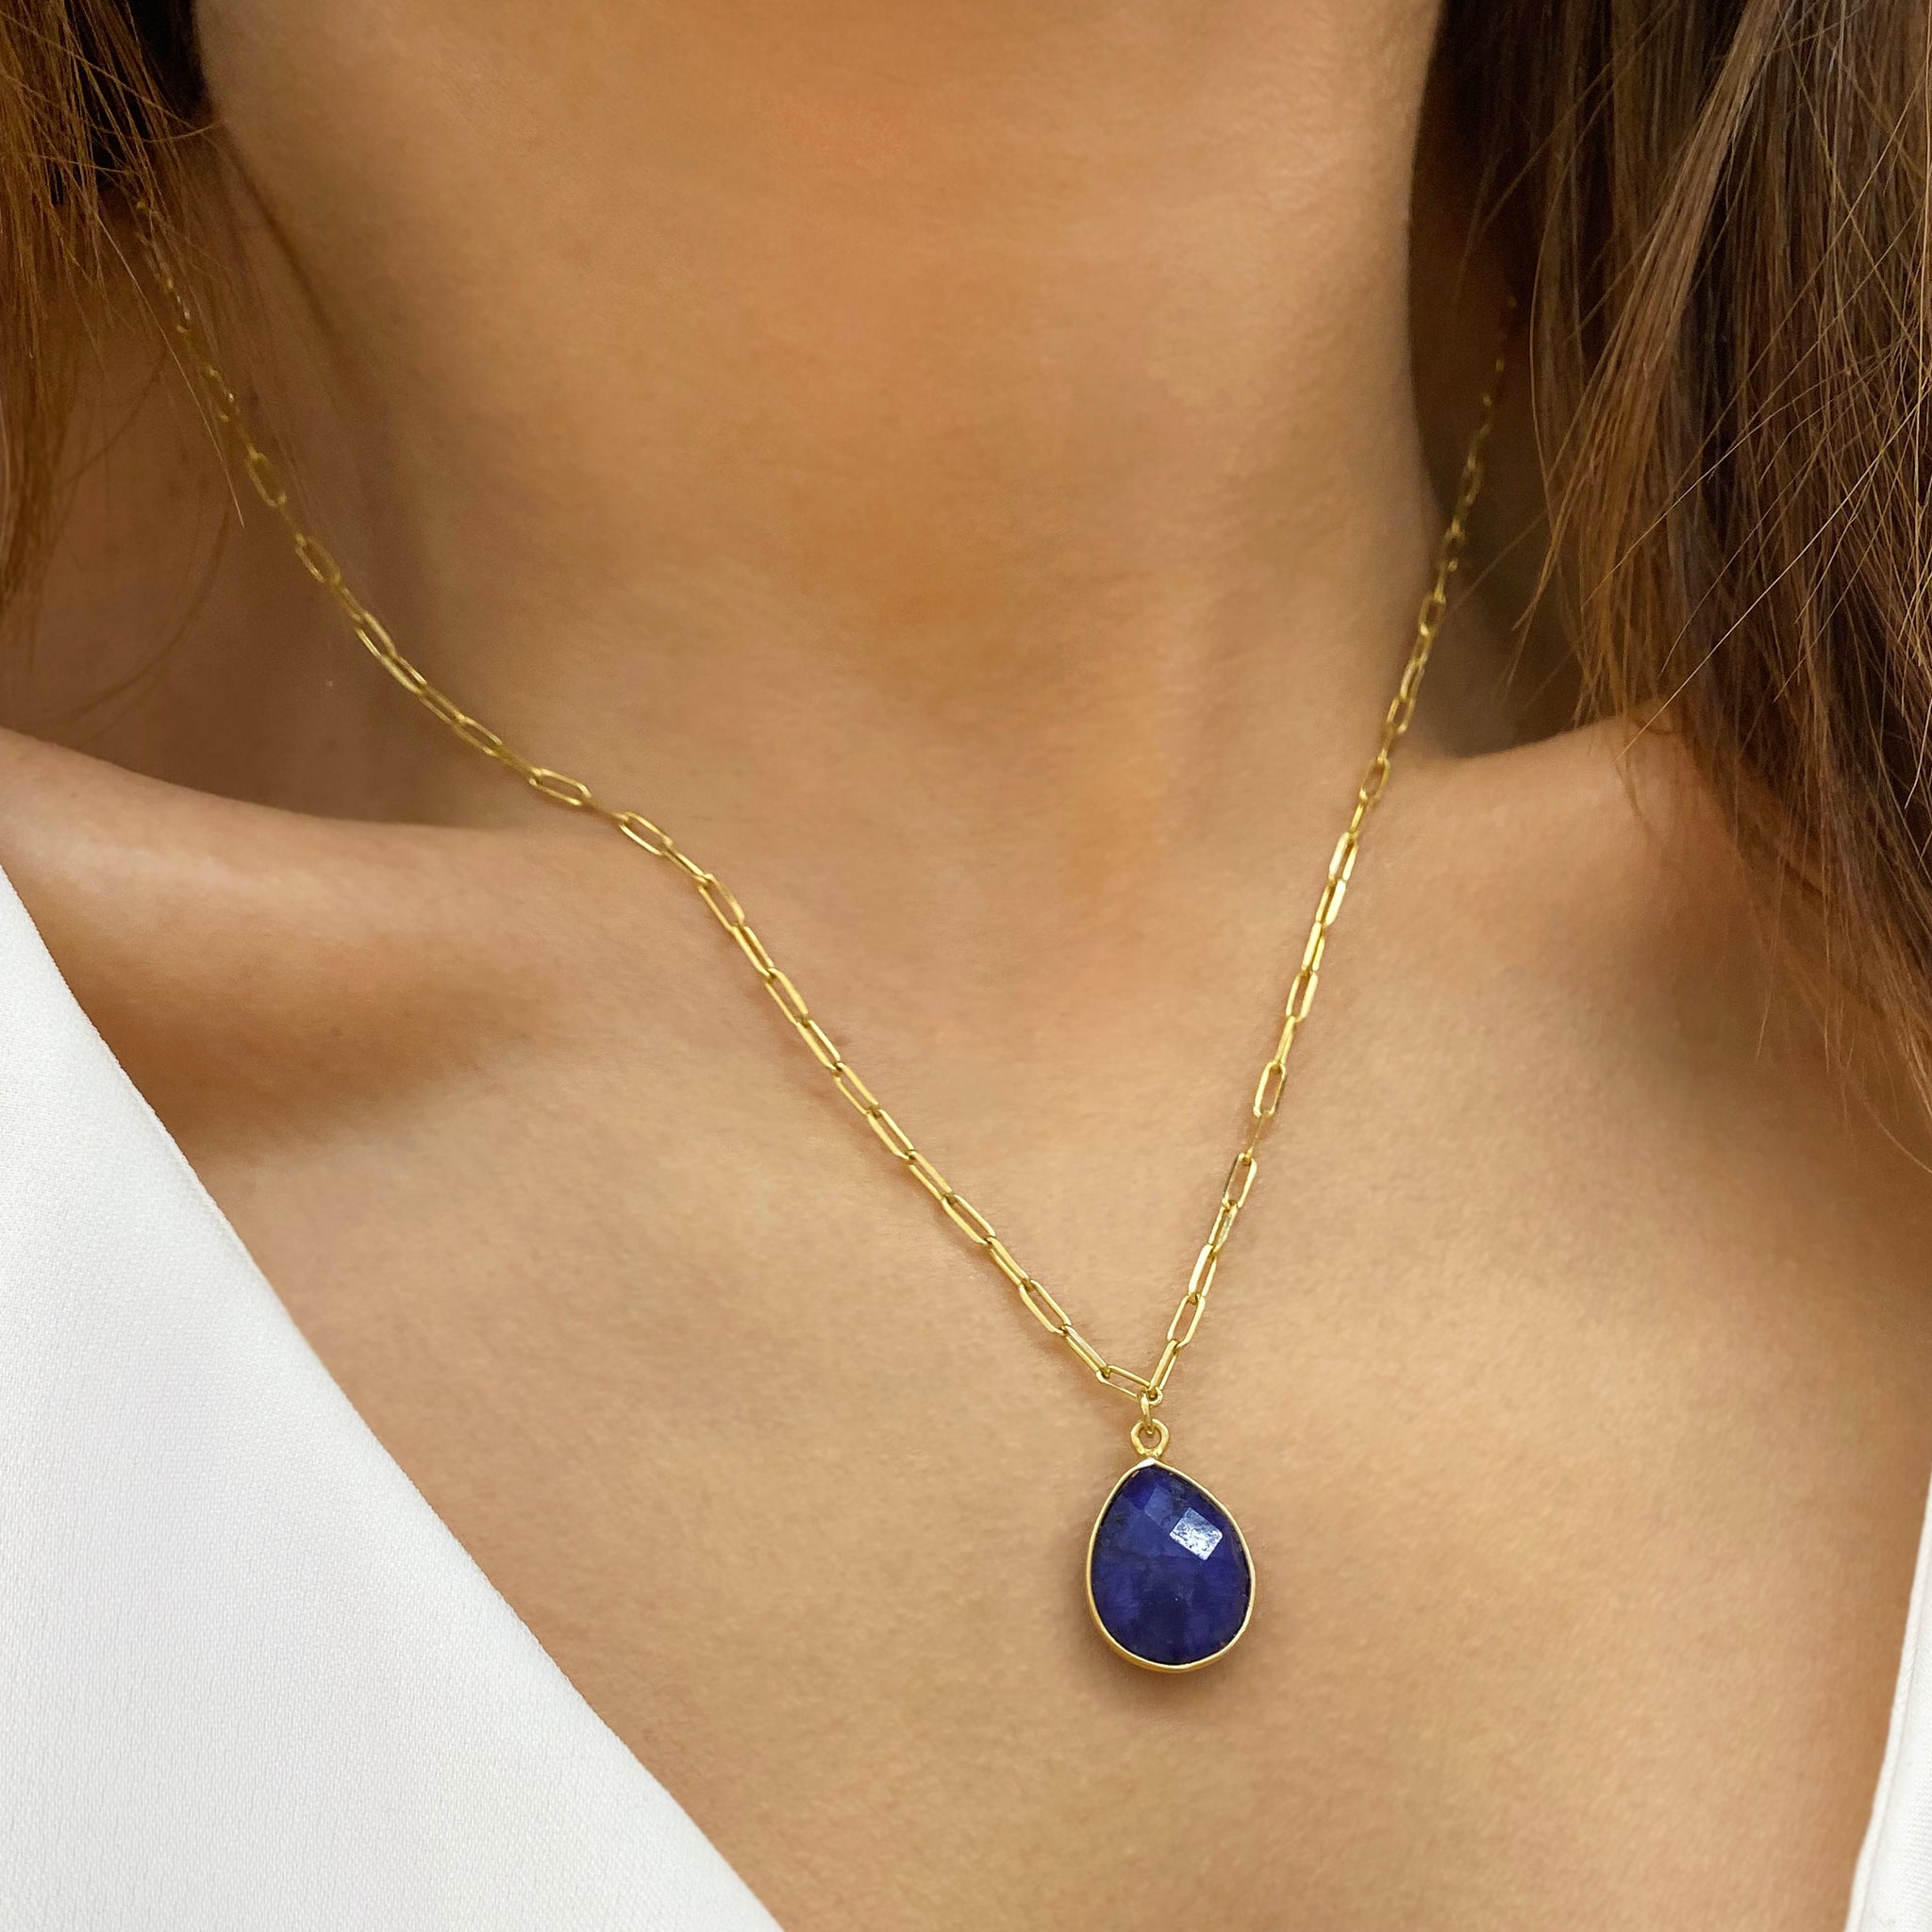 Sapphire Necklace With Peridot - Q Evon Fine Jewelry Collections